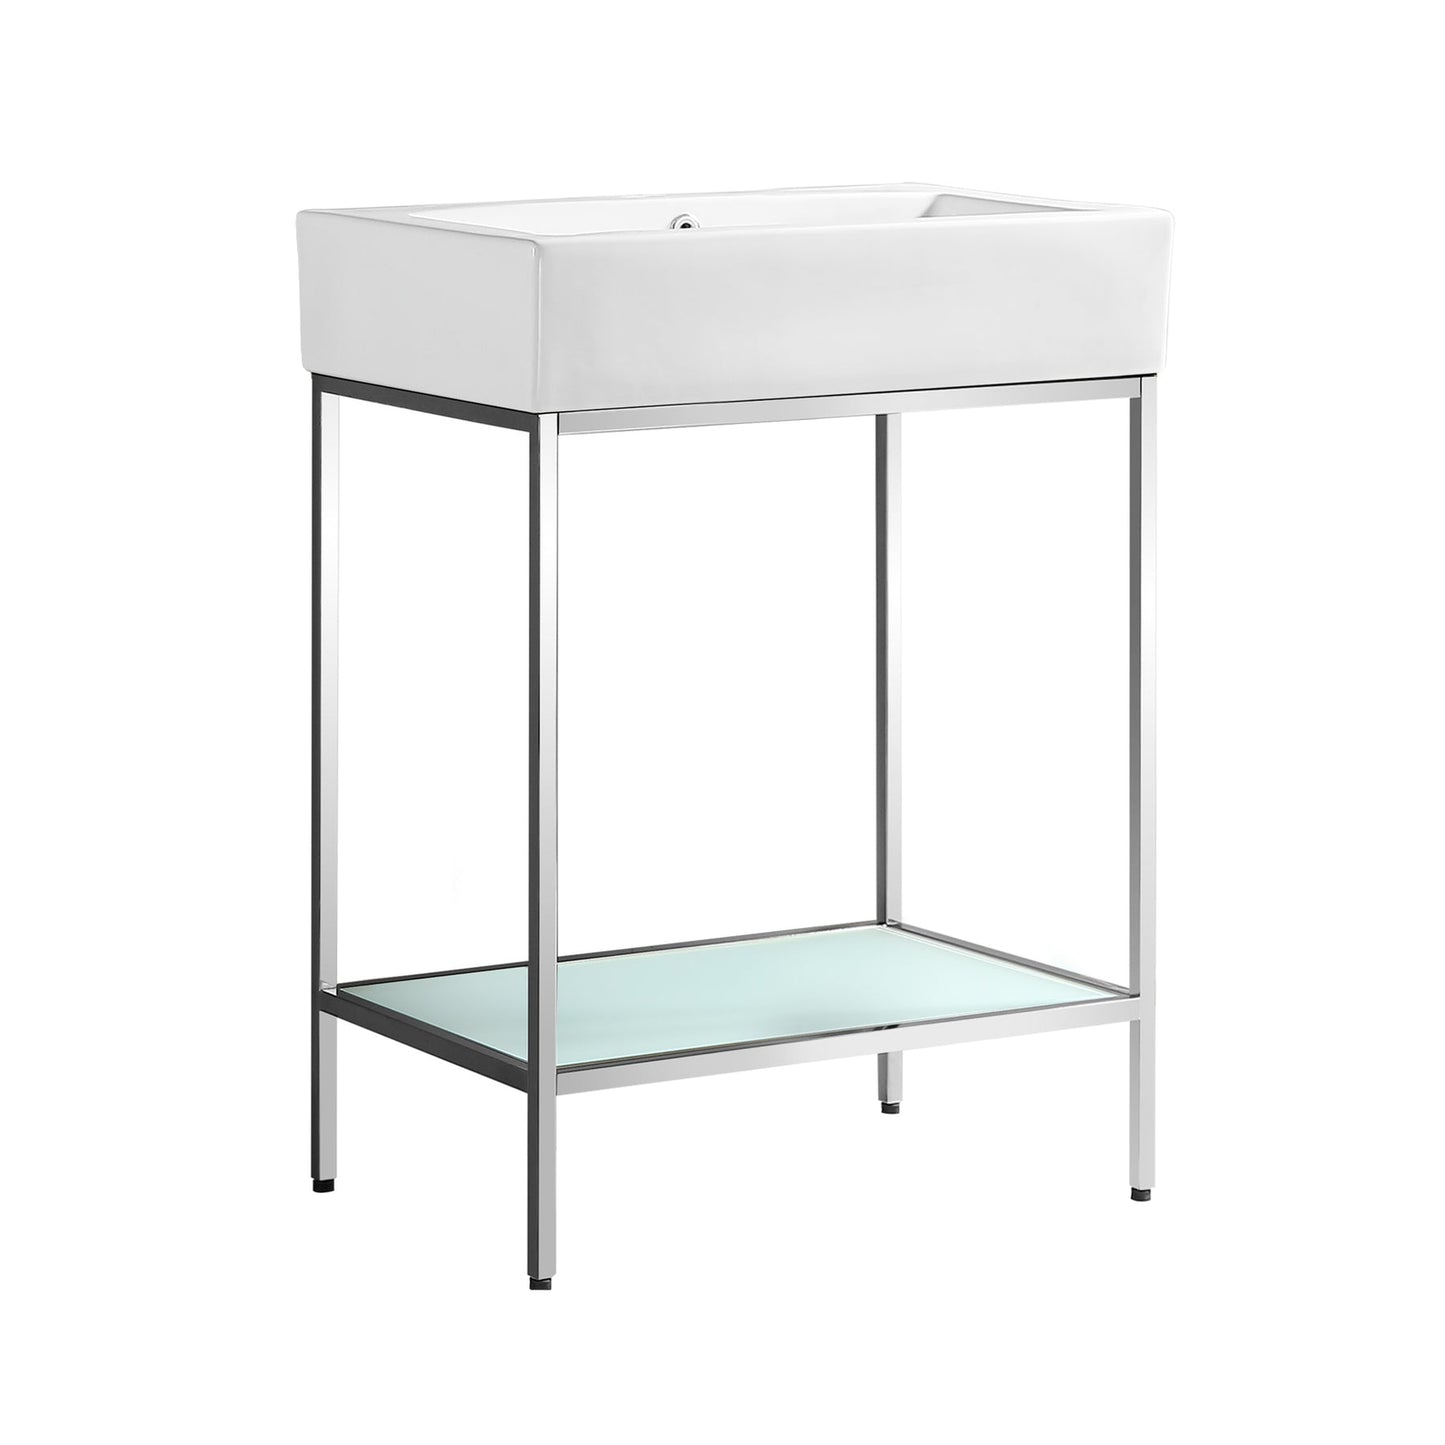 Swiss Madison Pierre 24" x 34" Freestanding White Bathroom Vanity With Ceramic Single Sink and Chrome Metal Frame